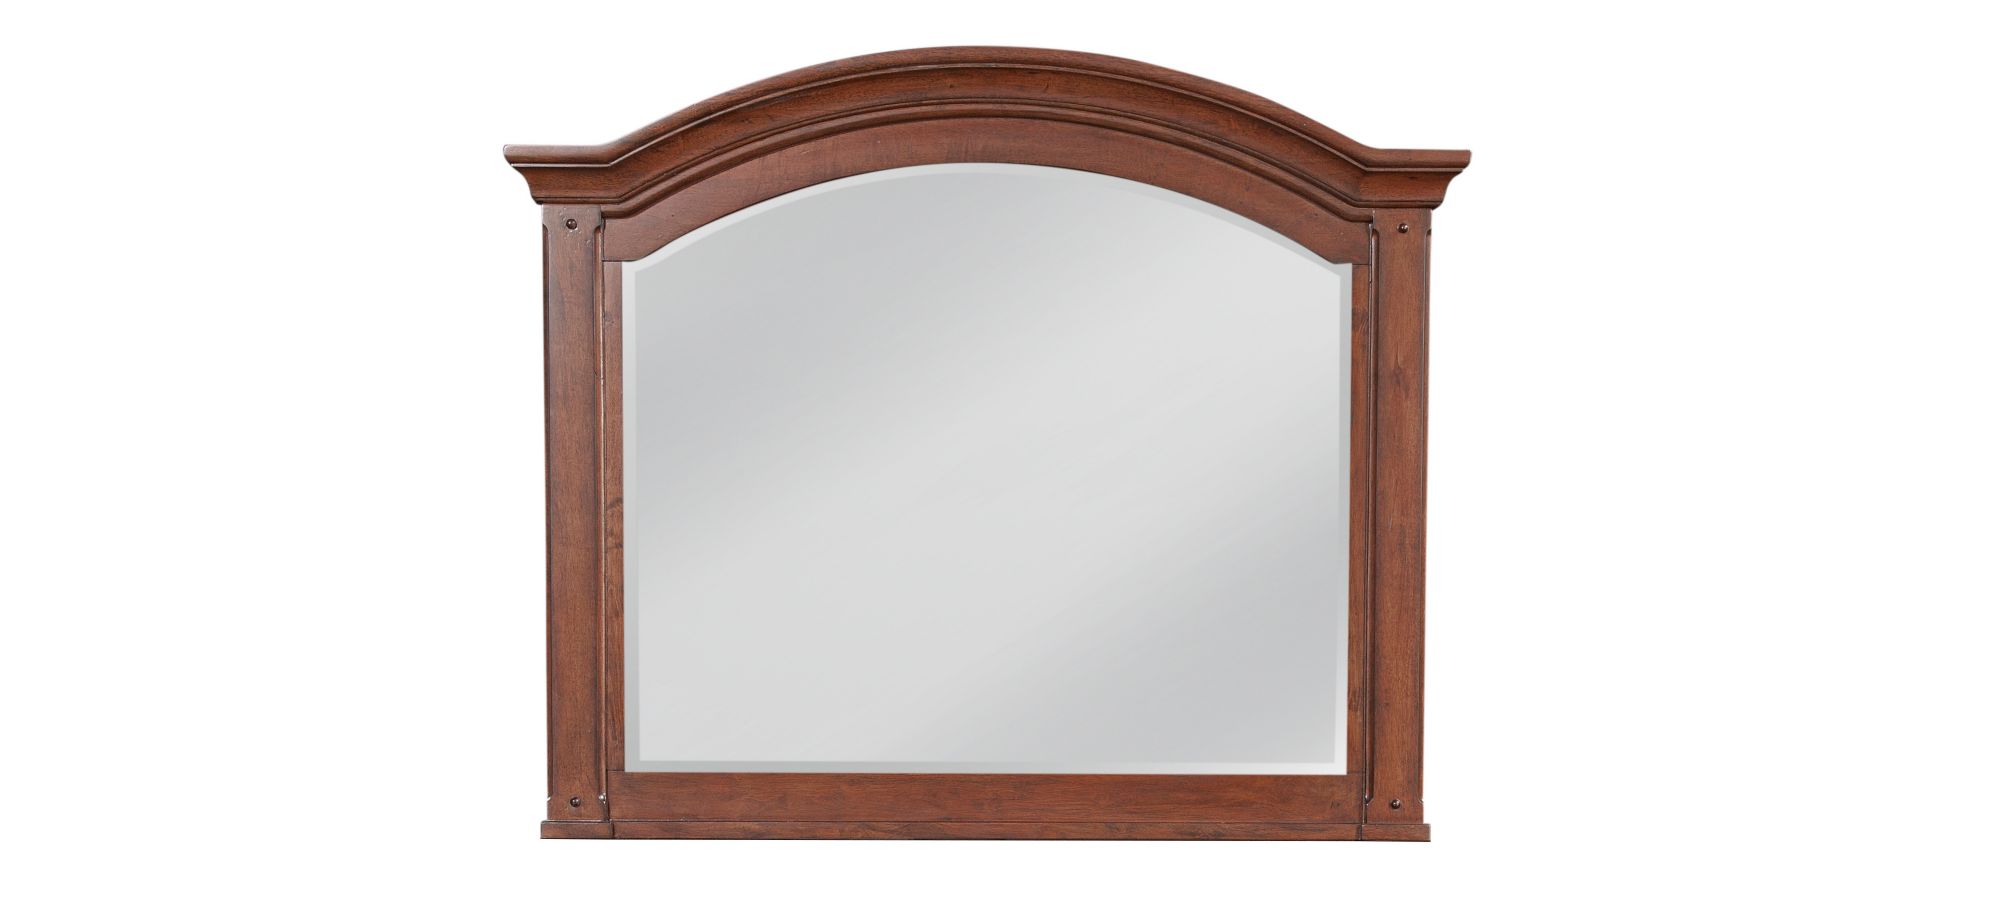 Sedona Mirror in Cinnamon Cherry by American Woodcrafters